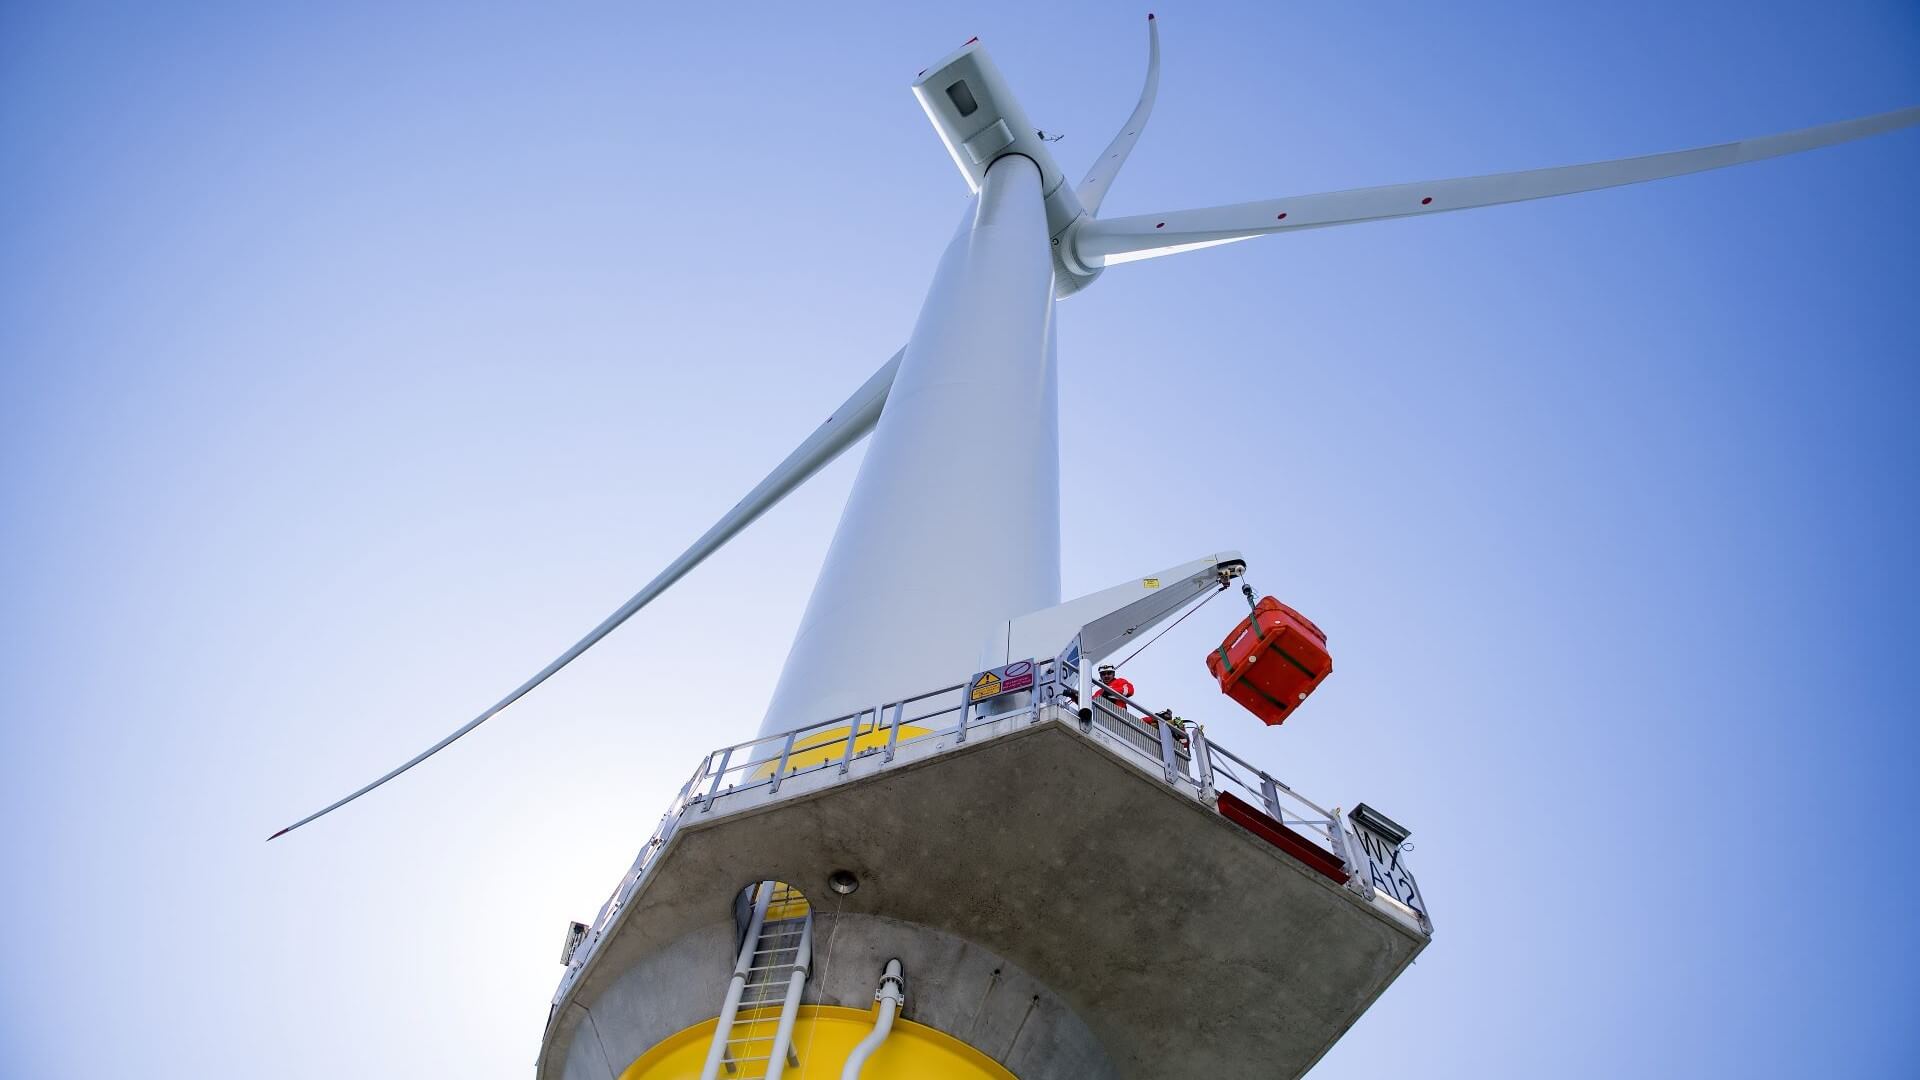 View from below looking up at offshore wind turbine